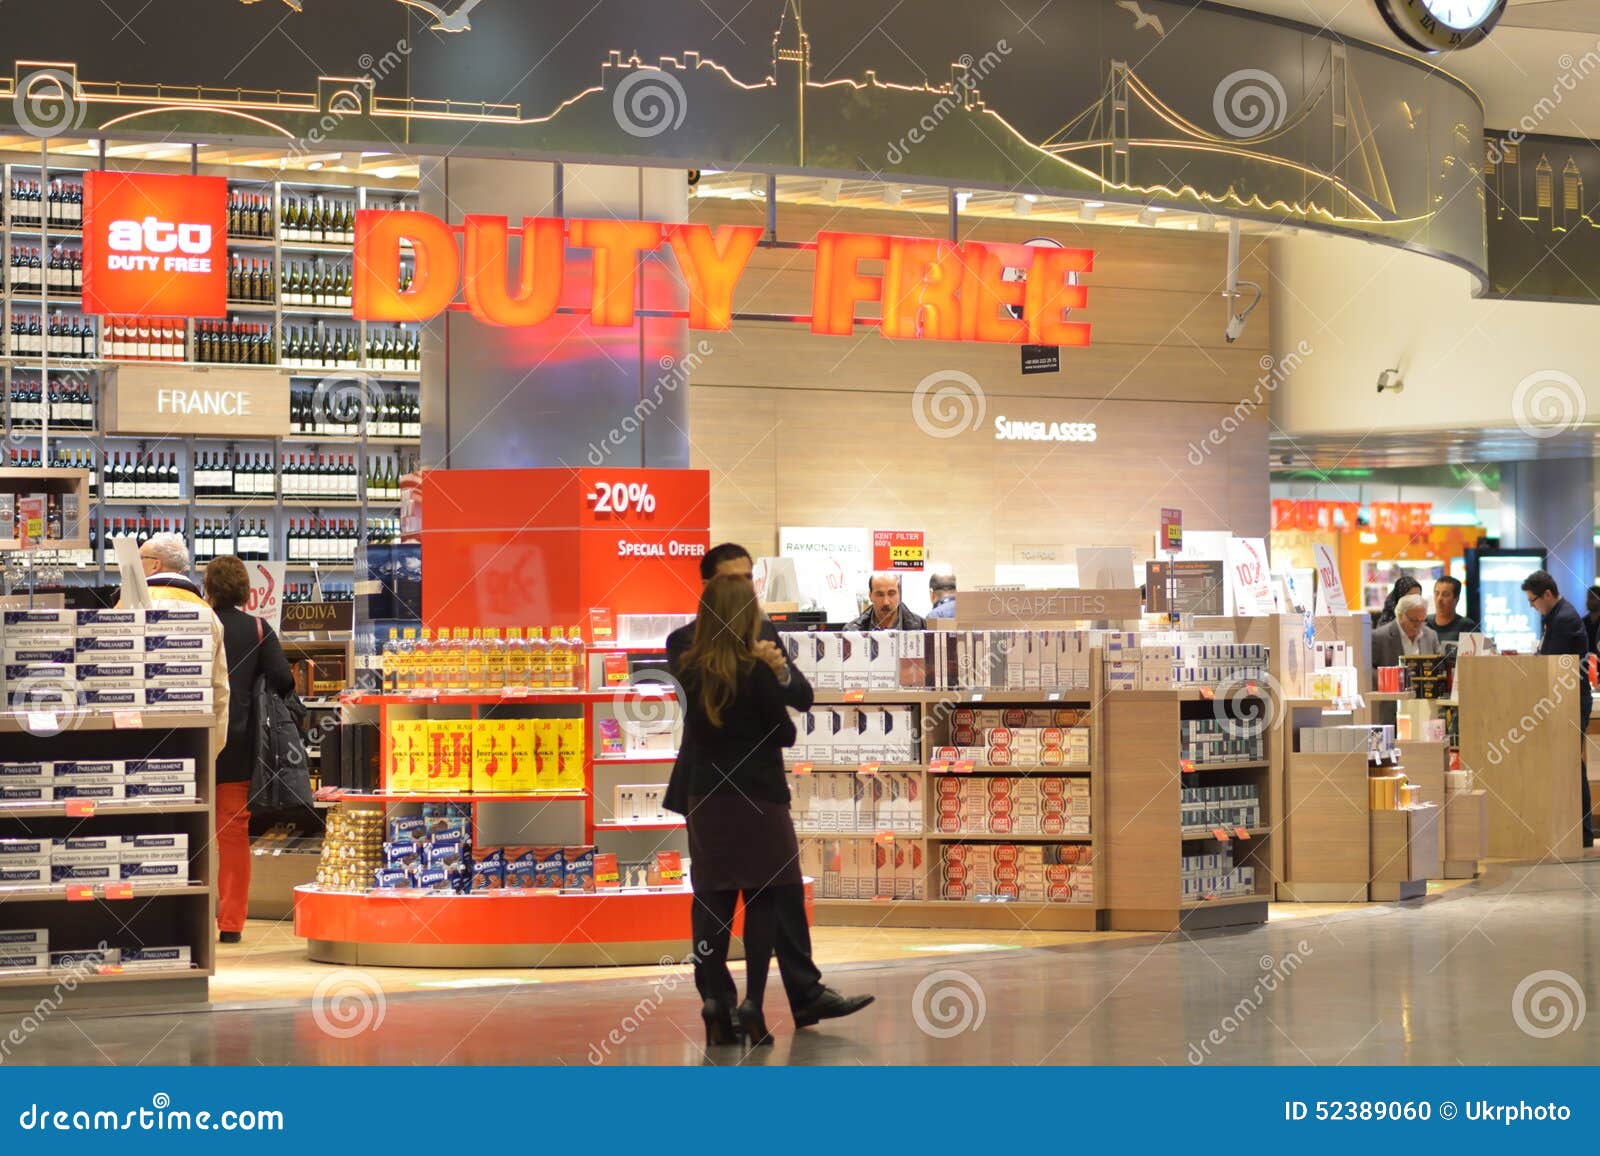 people in the duty free shop in ataturk international airport editorial image image of people indoors 52389060